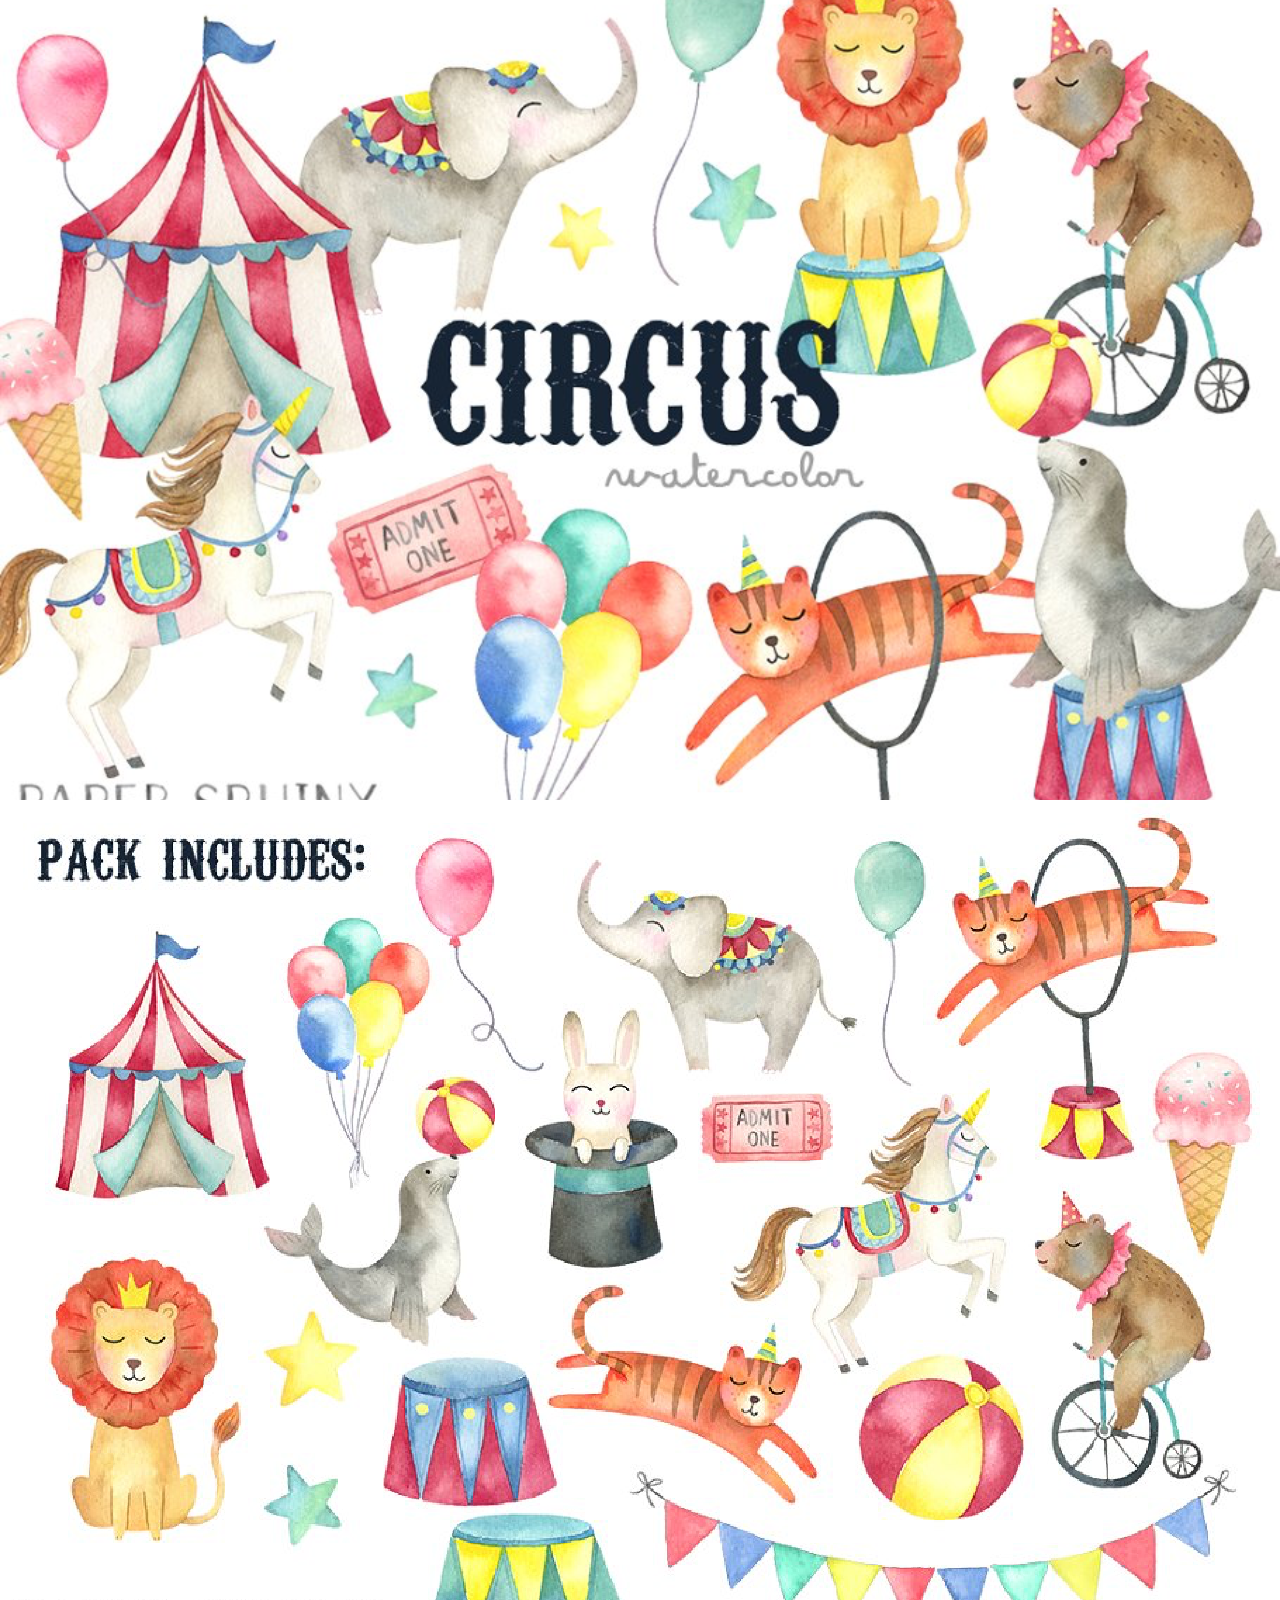 Watercolor circus clipart pack pinterest image preview.